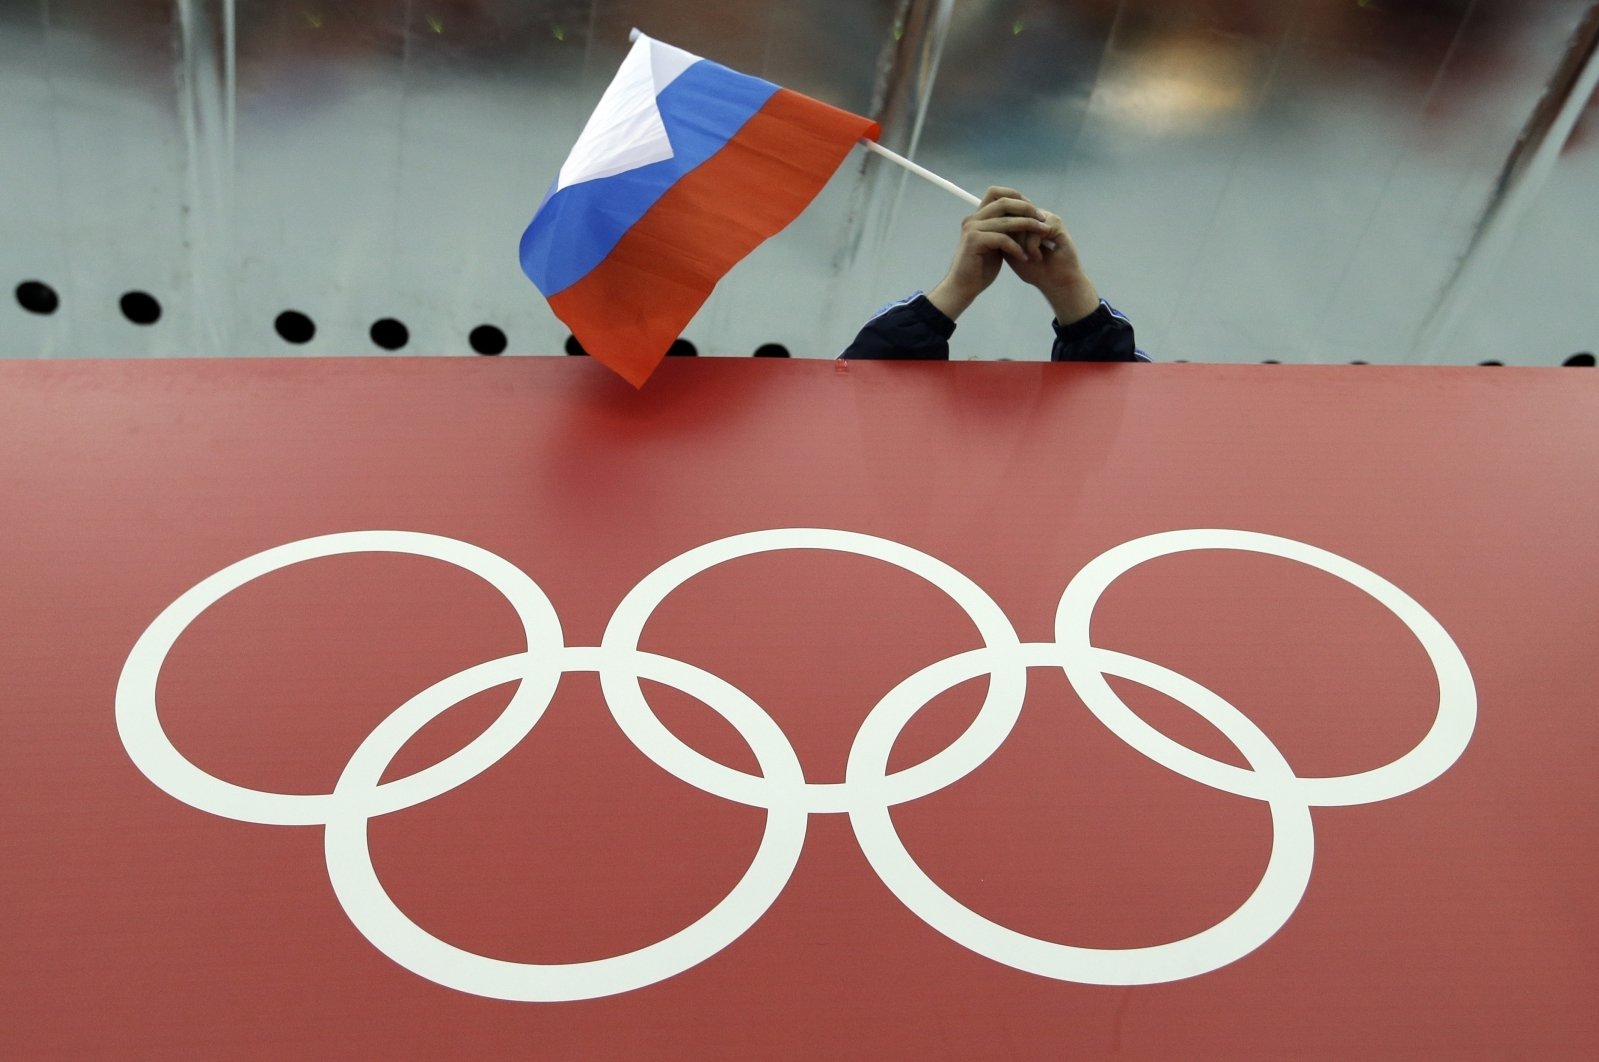 A Russian flag is held above the Olympic Rings at Adler Arena Skating Center during the Winter Olympics in Sochi, Russia, Feb. 18, 2014. (AP Photo)